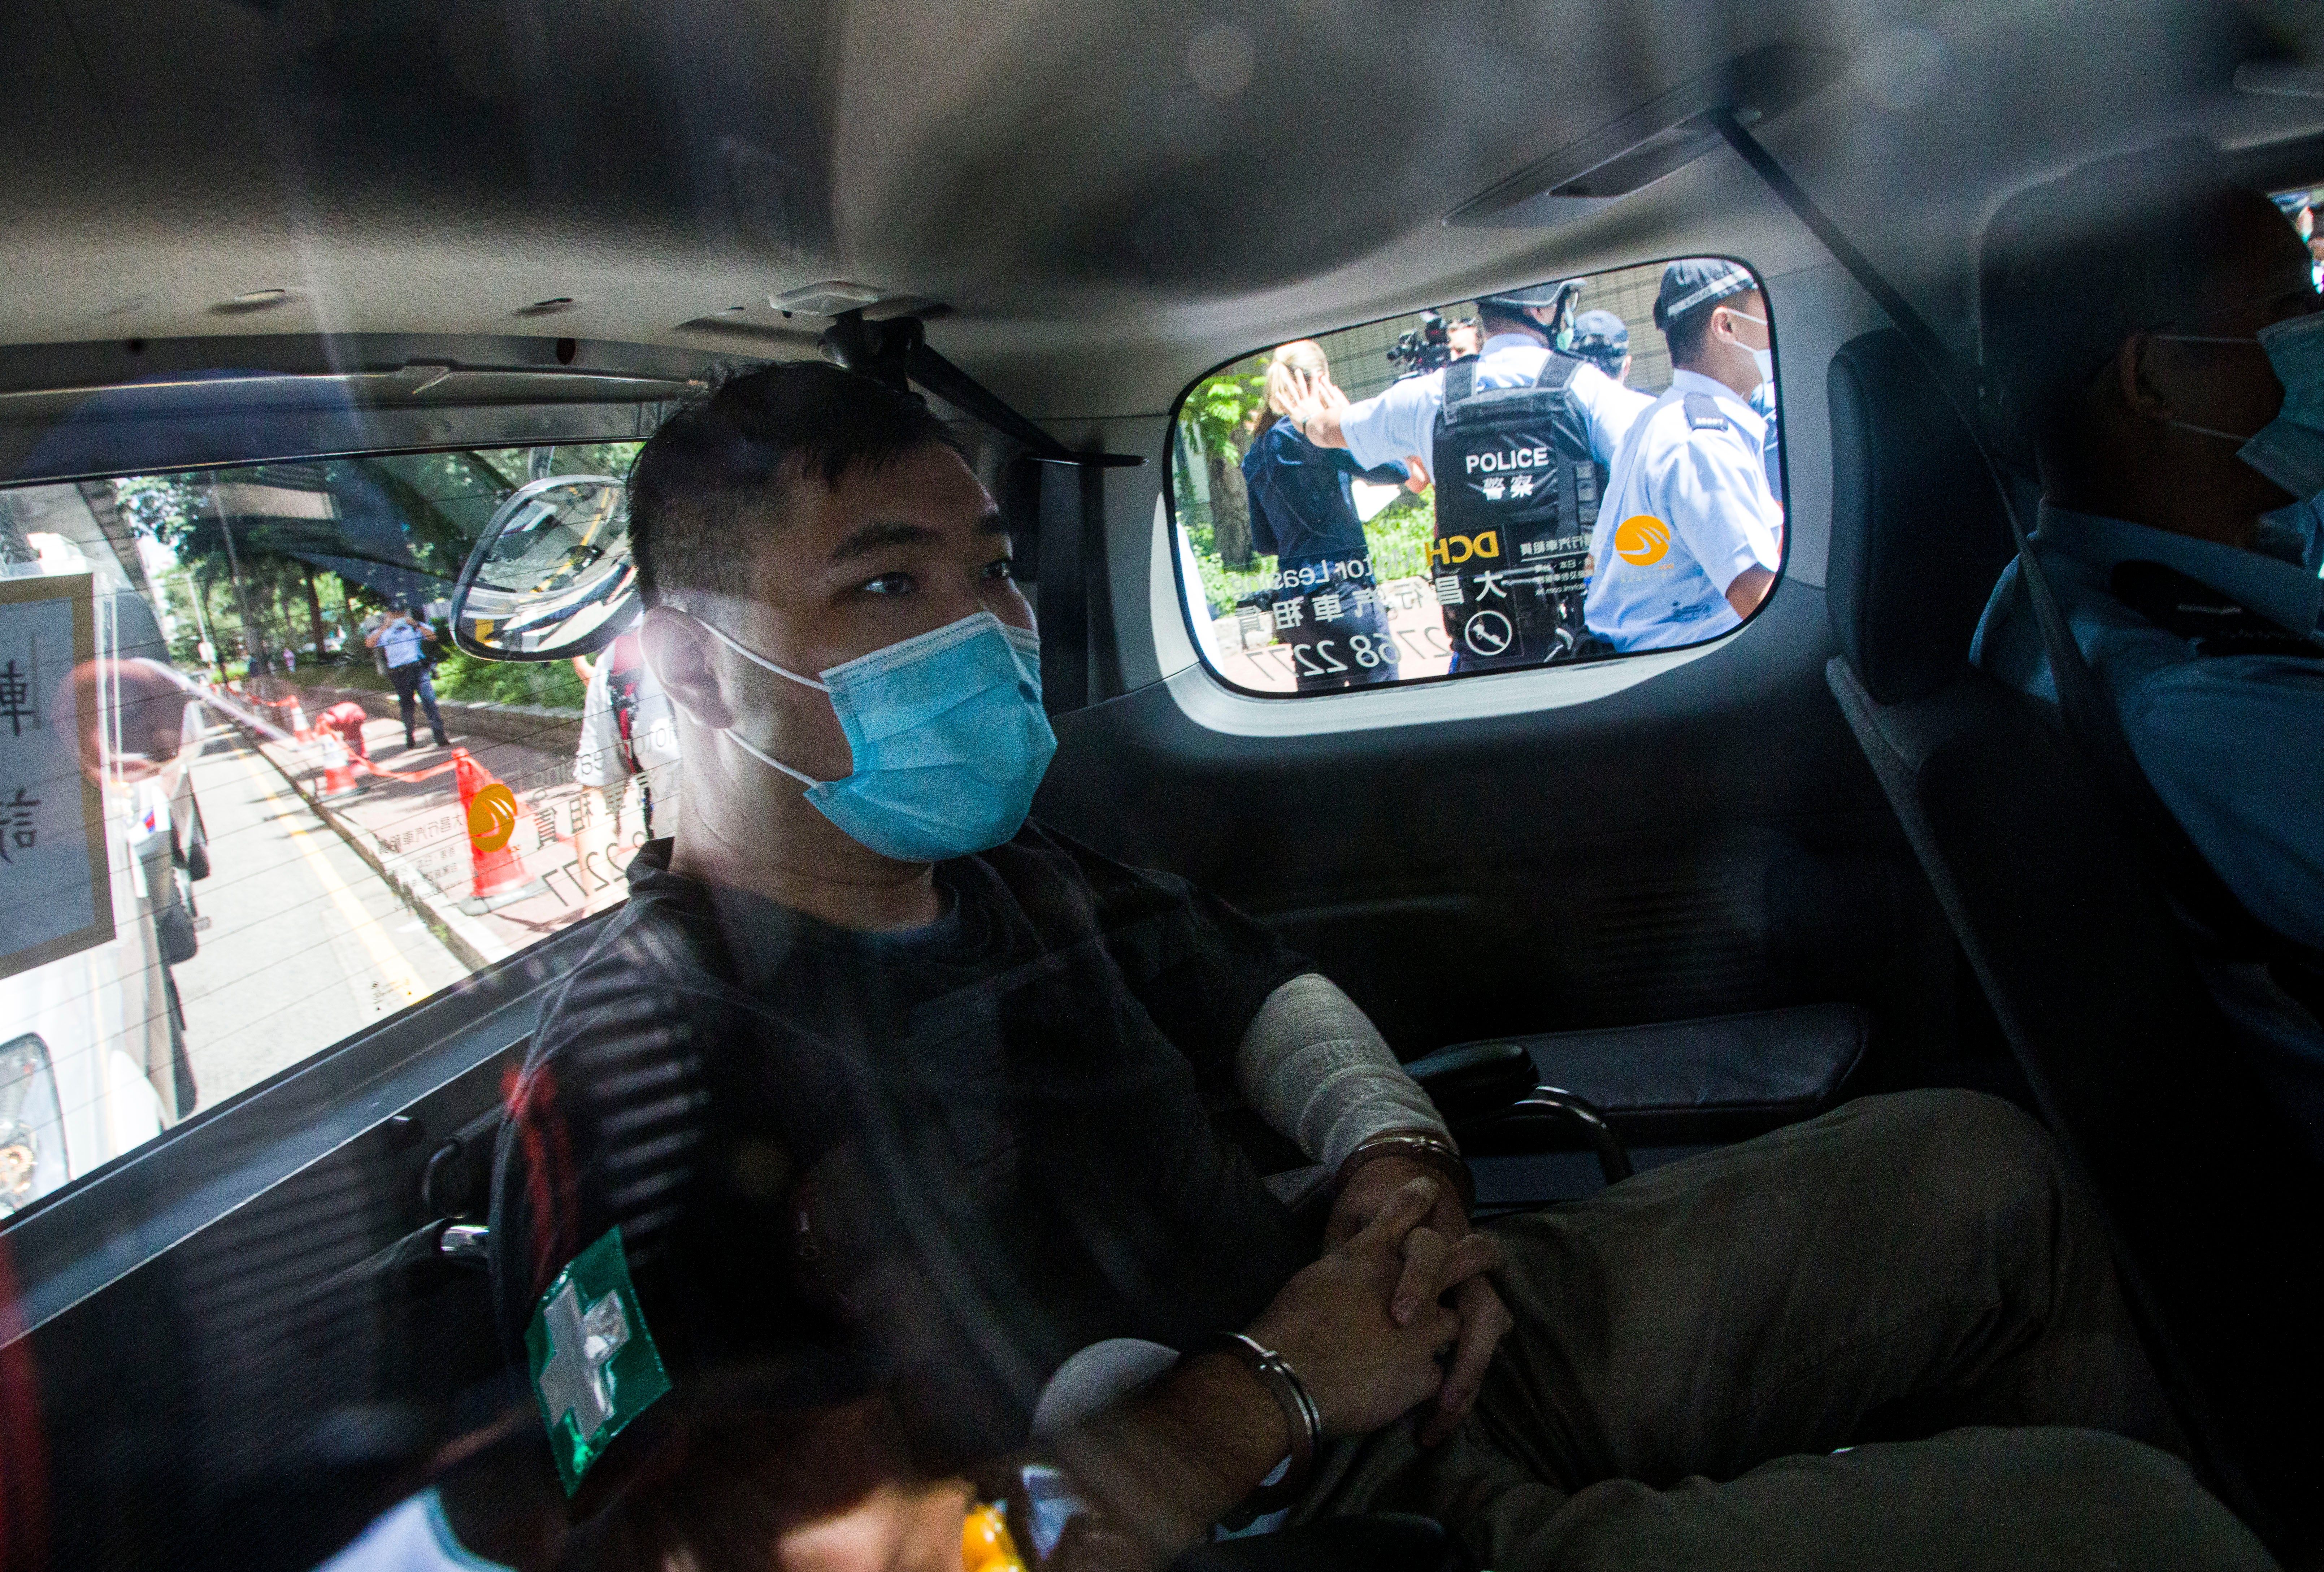 File: Hong Kong defendant Tong Ying-Kit, 24, arrives at court after being accused of deliberately driving his motorcycle into a group of police officers last Wednesday on 6 July, 2020